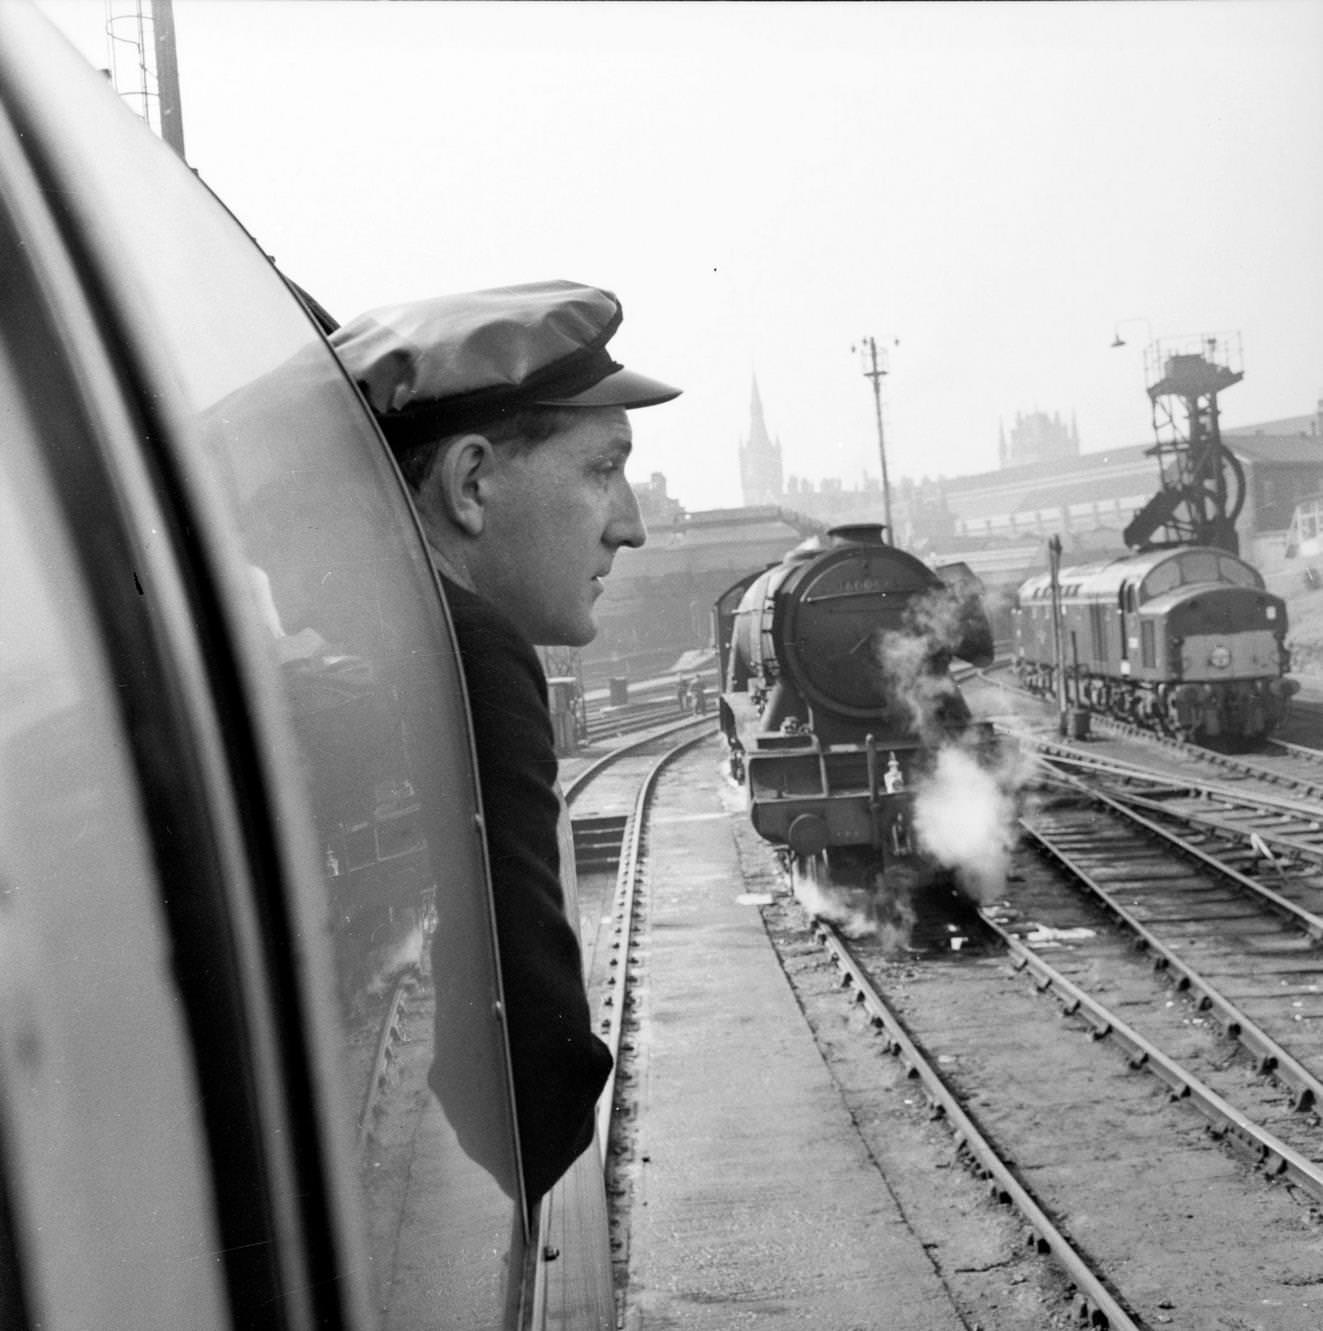 The railway employee responsible for the oiling on board the Flying Scotsman looks at an old steam locomotive in a siding at King's Cross Station in London as the train leaves for Edinburgh on its centenary journey, 1962